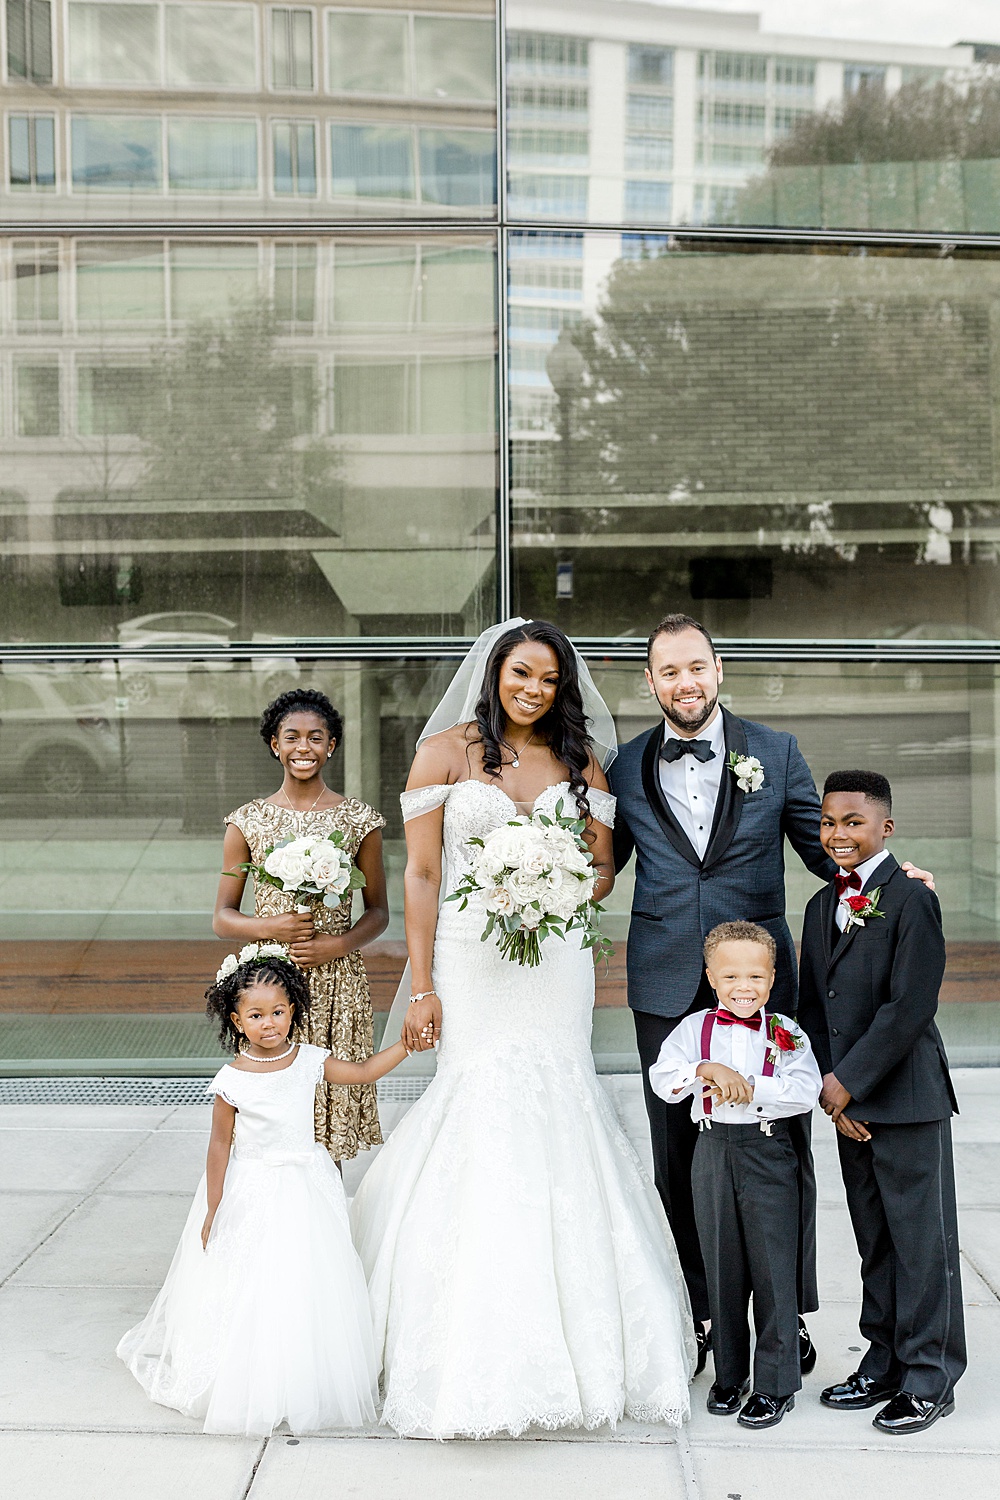 Arena Stage Wedding Ceremony in Washington, DC, Event Planning by Bright Occasions, Photography by Iris Mannings